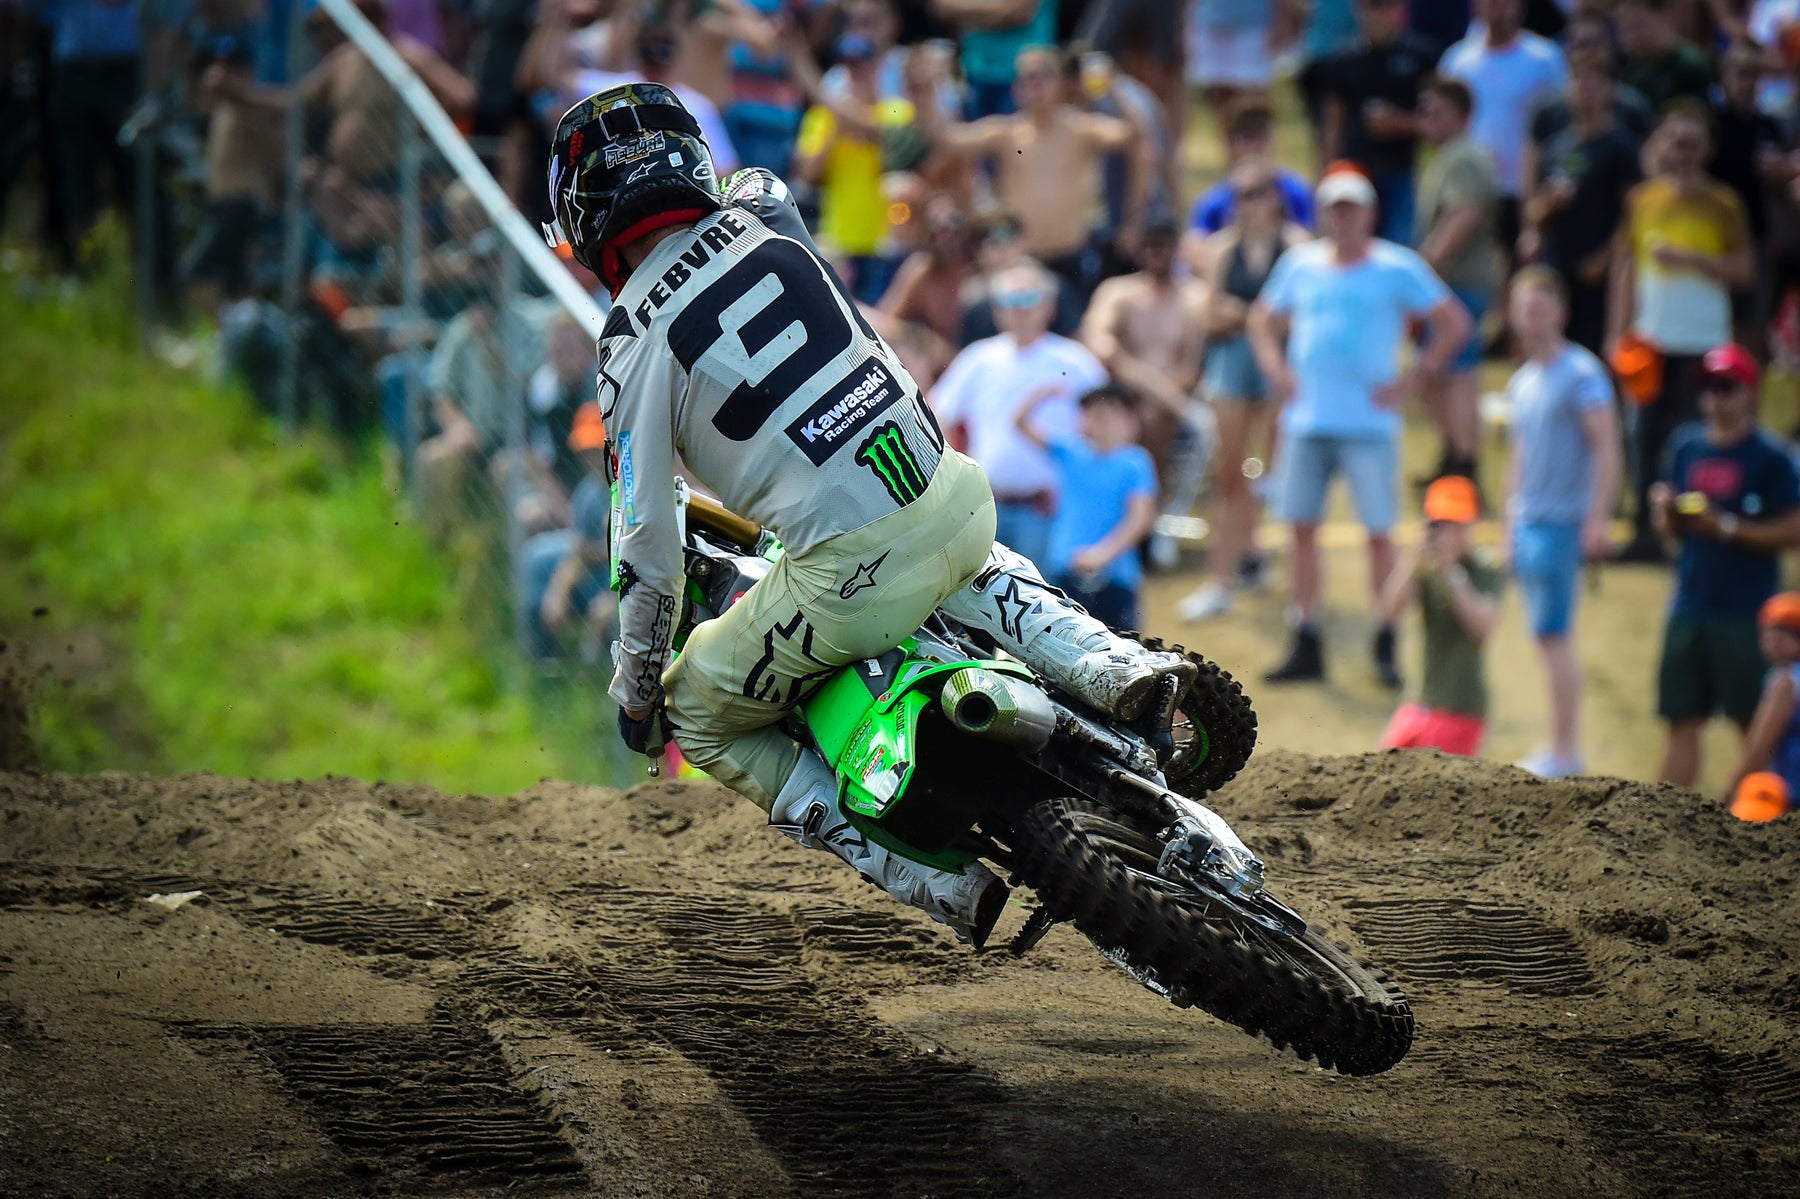 STRONG PERFORMANCE SEES ROMAIN FEBVRE IN THE MIX FOR MXGP GLORY IN THE NETHERLANDS